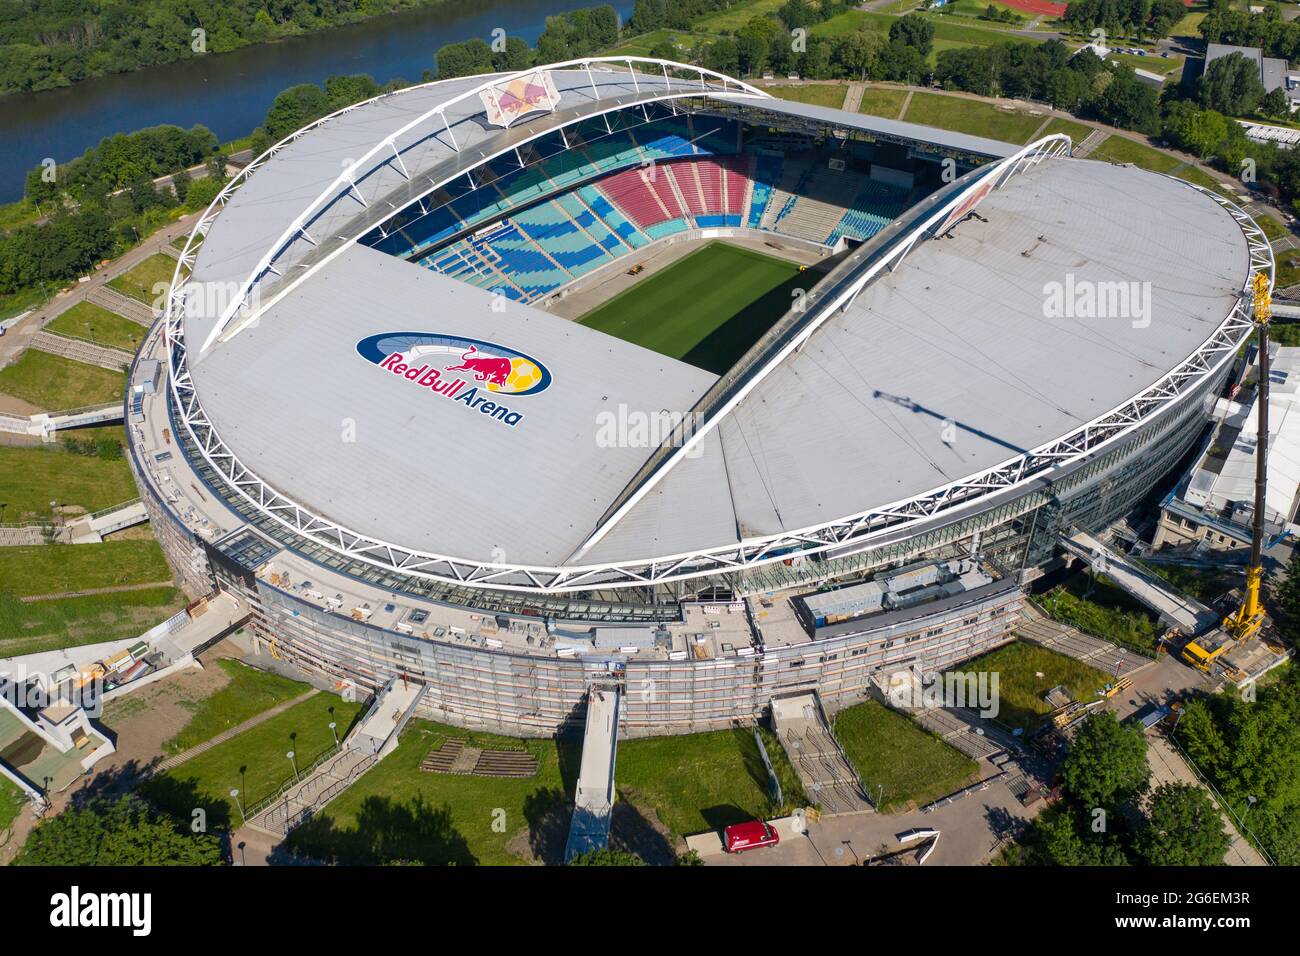 14 June 2021, Saxony, Leipzig: Football: Bundesliga, RB Leipzig. A crane stands at the Red Bull Arena. The home ground of the Rasenballers is being rebuilt. The spectator capacity will increase from 42,558 to 47,069 standing and seated. The outside of the stadium is enclosed with a soundproof facade. The embankment of the former Zentralstadion, which encompasses the arena, was cut open behind the historic bell tower to make room for a new entrance. RB Leipzig is investing a good 60 million euros in the conversion by 2022. (Aerial view with drone) Photo: Jan Woitas/dpa-Zentralbild/dpa Stock Photo